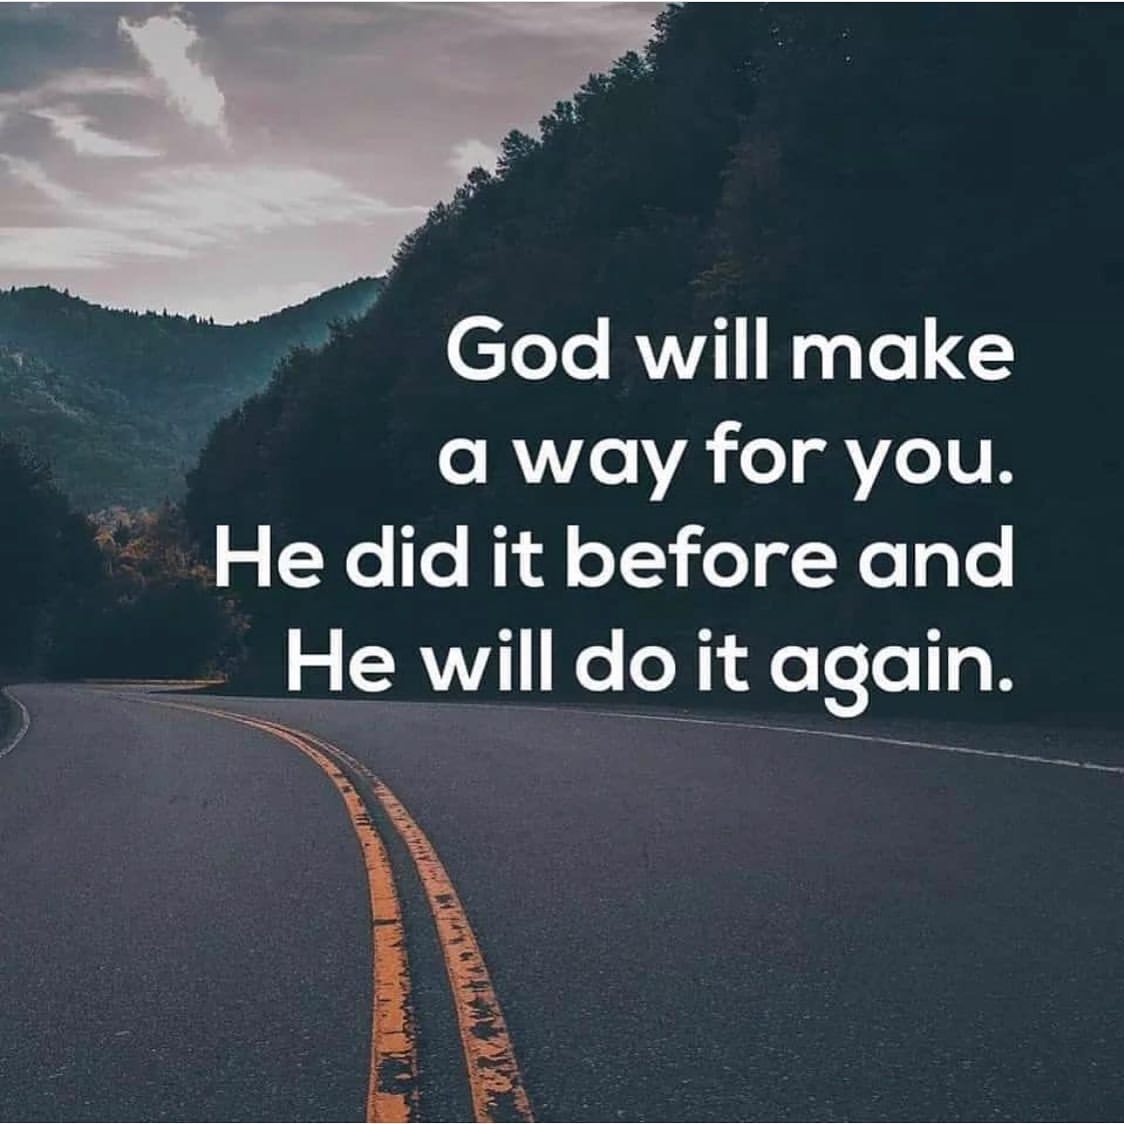 God will make a way for you. He did it before and He will do it again.